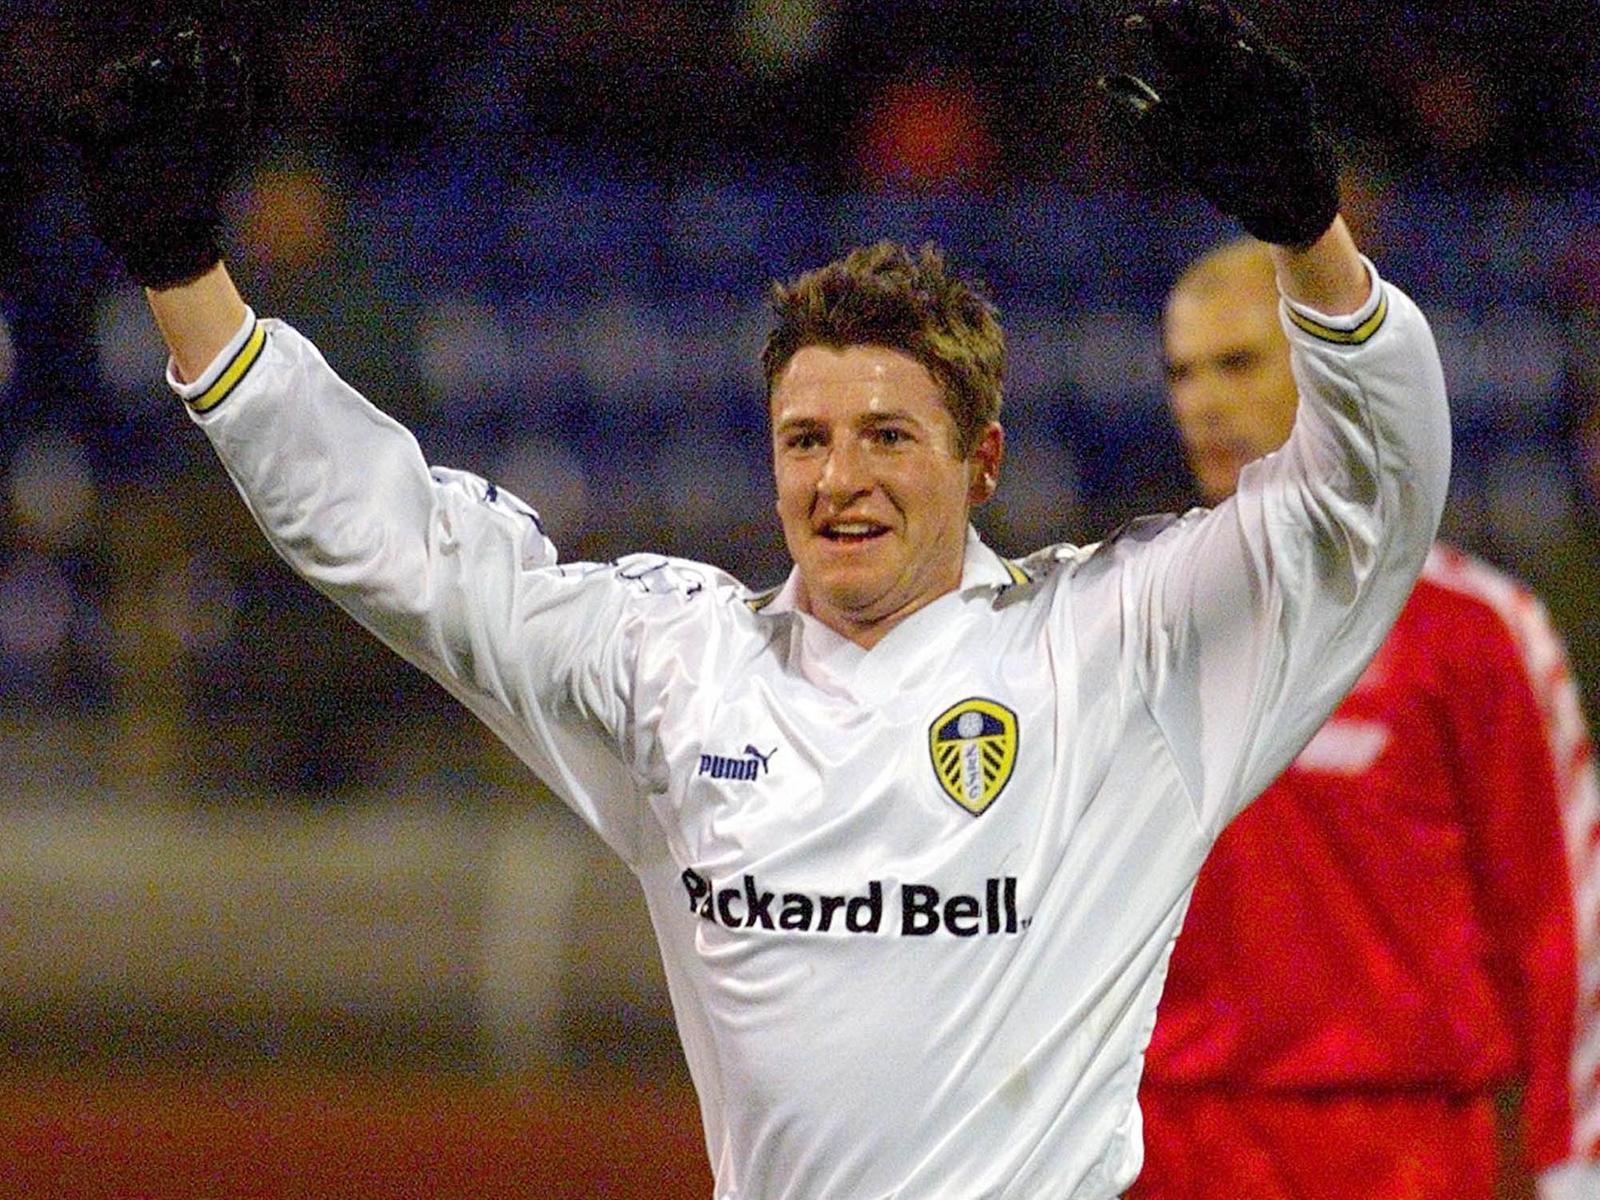 Leeds were the masters of Moscow after a dominant display. Three goals within 48 mins turned the match into a non-event - much to the delight of David O'Leary.